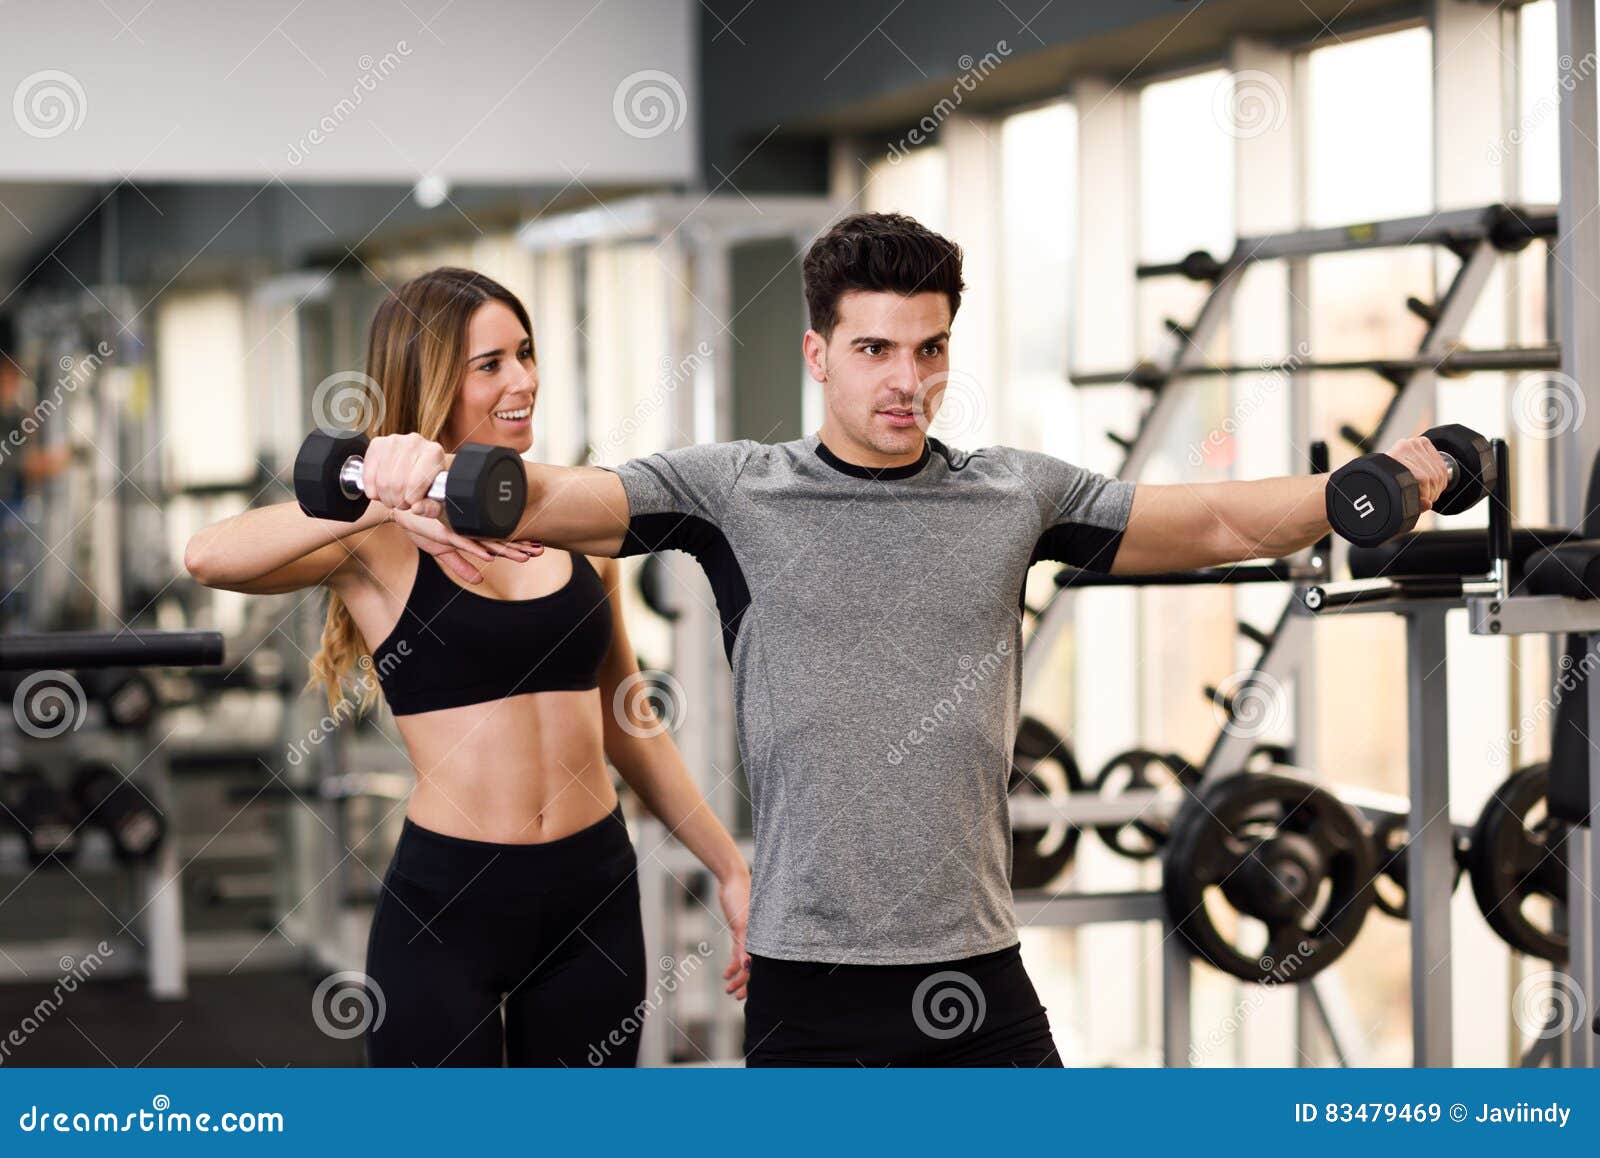 Female Personal Trainer White Background Images – Browse 9,085